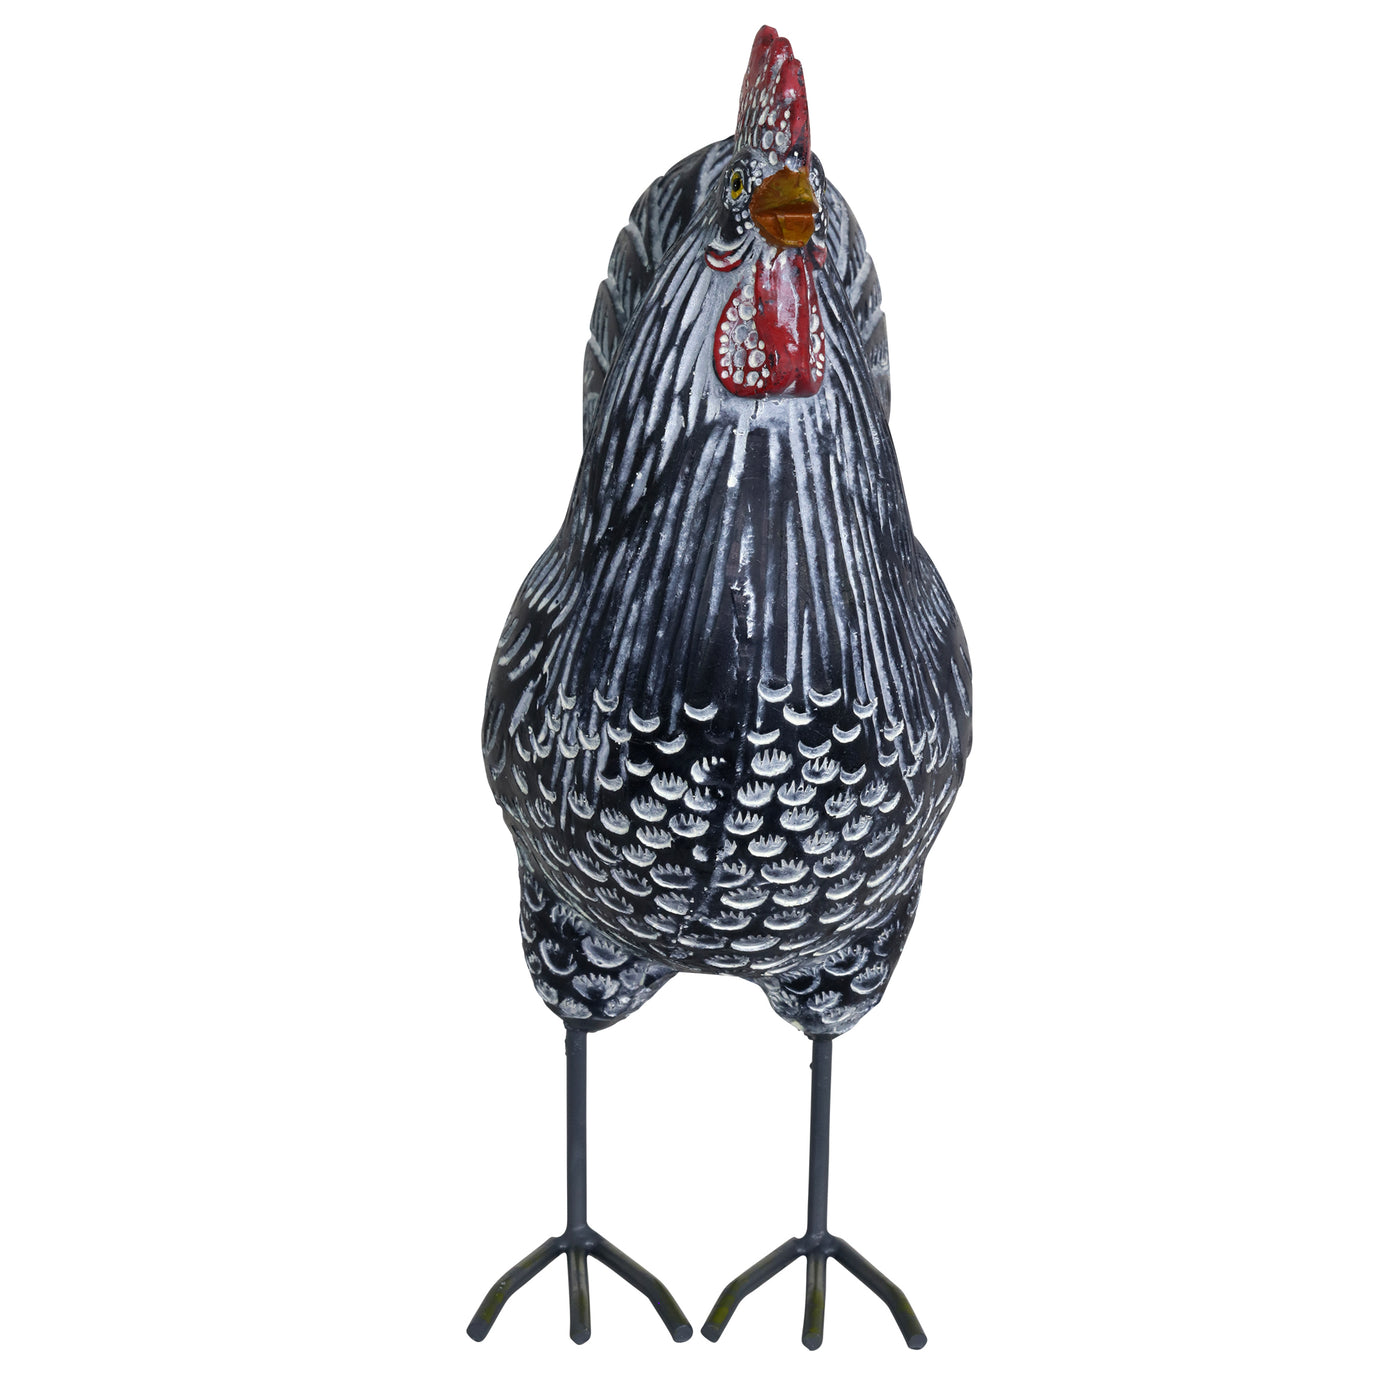 49 Giant Napa Rooster Decor only $999.99 at Garden Fun